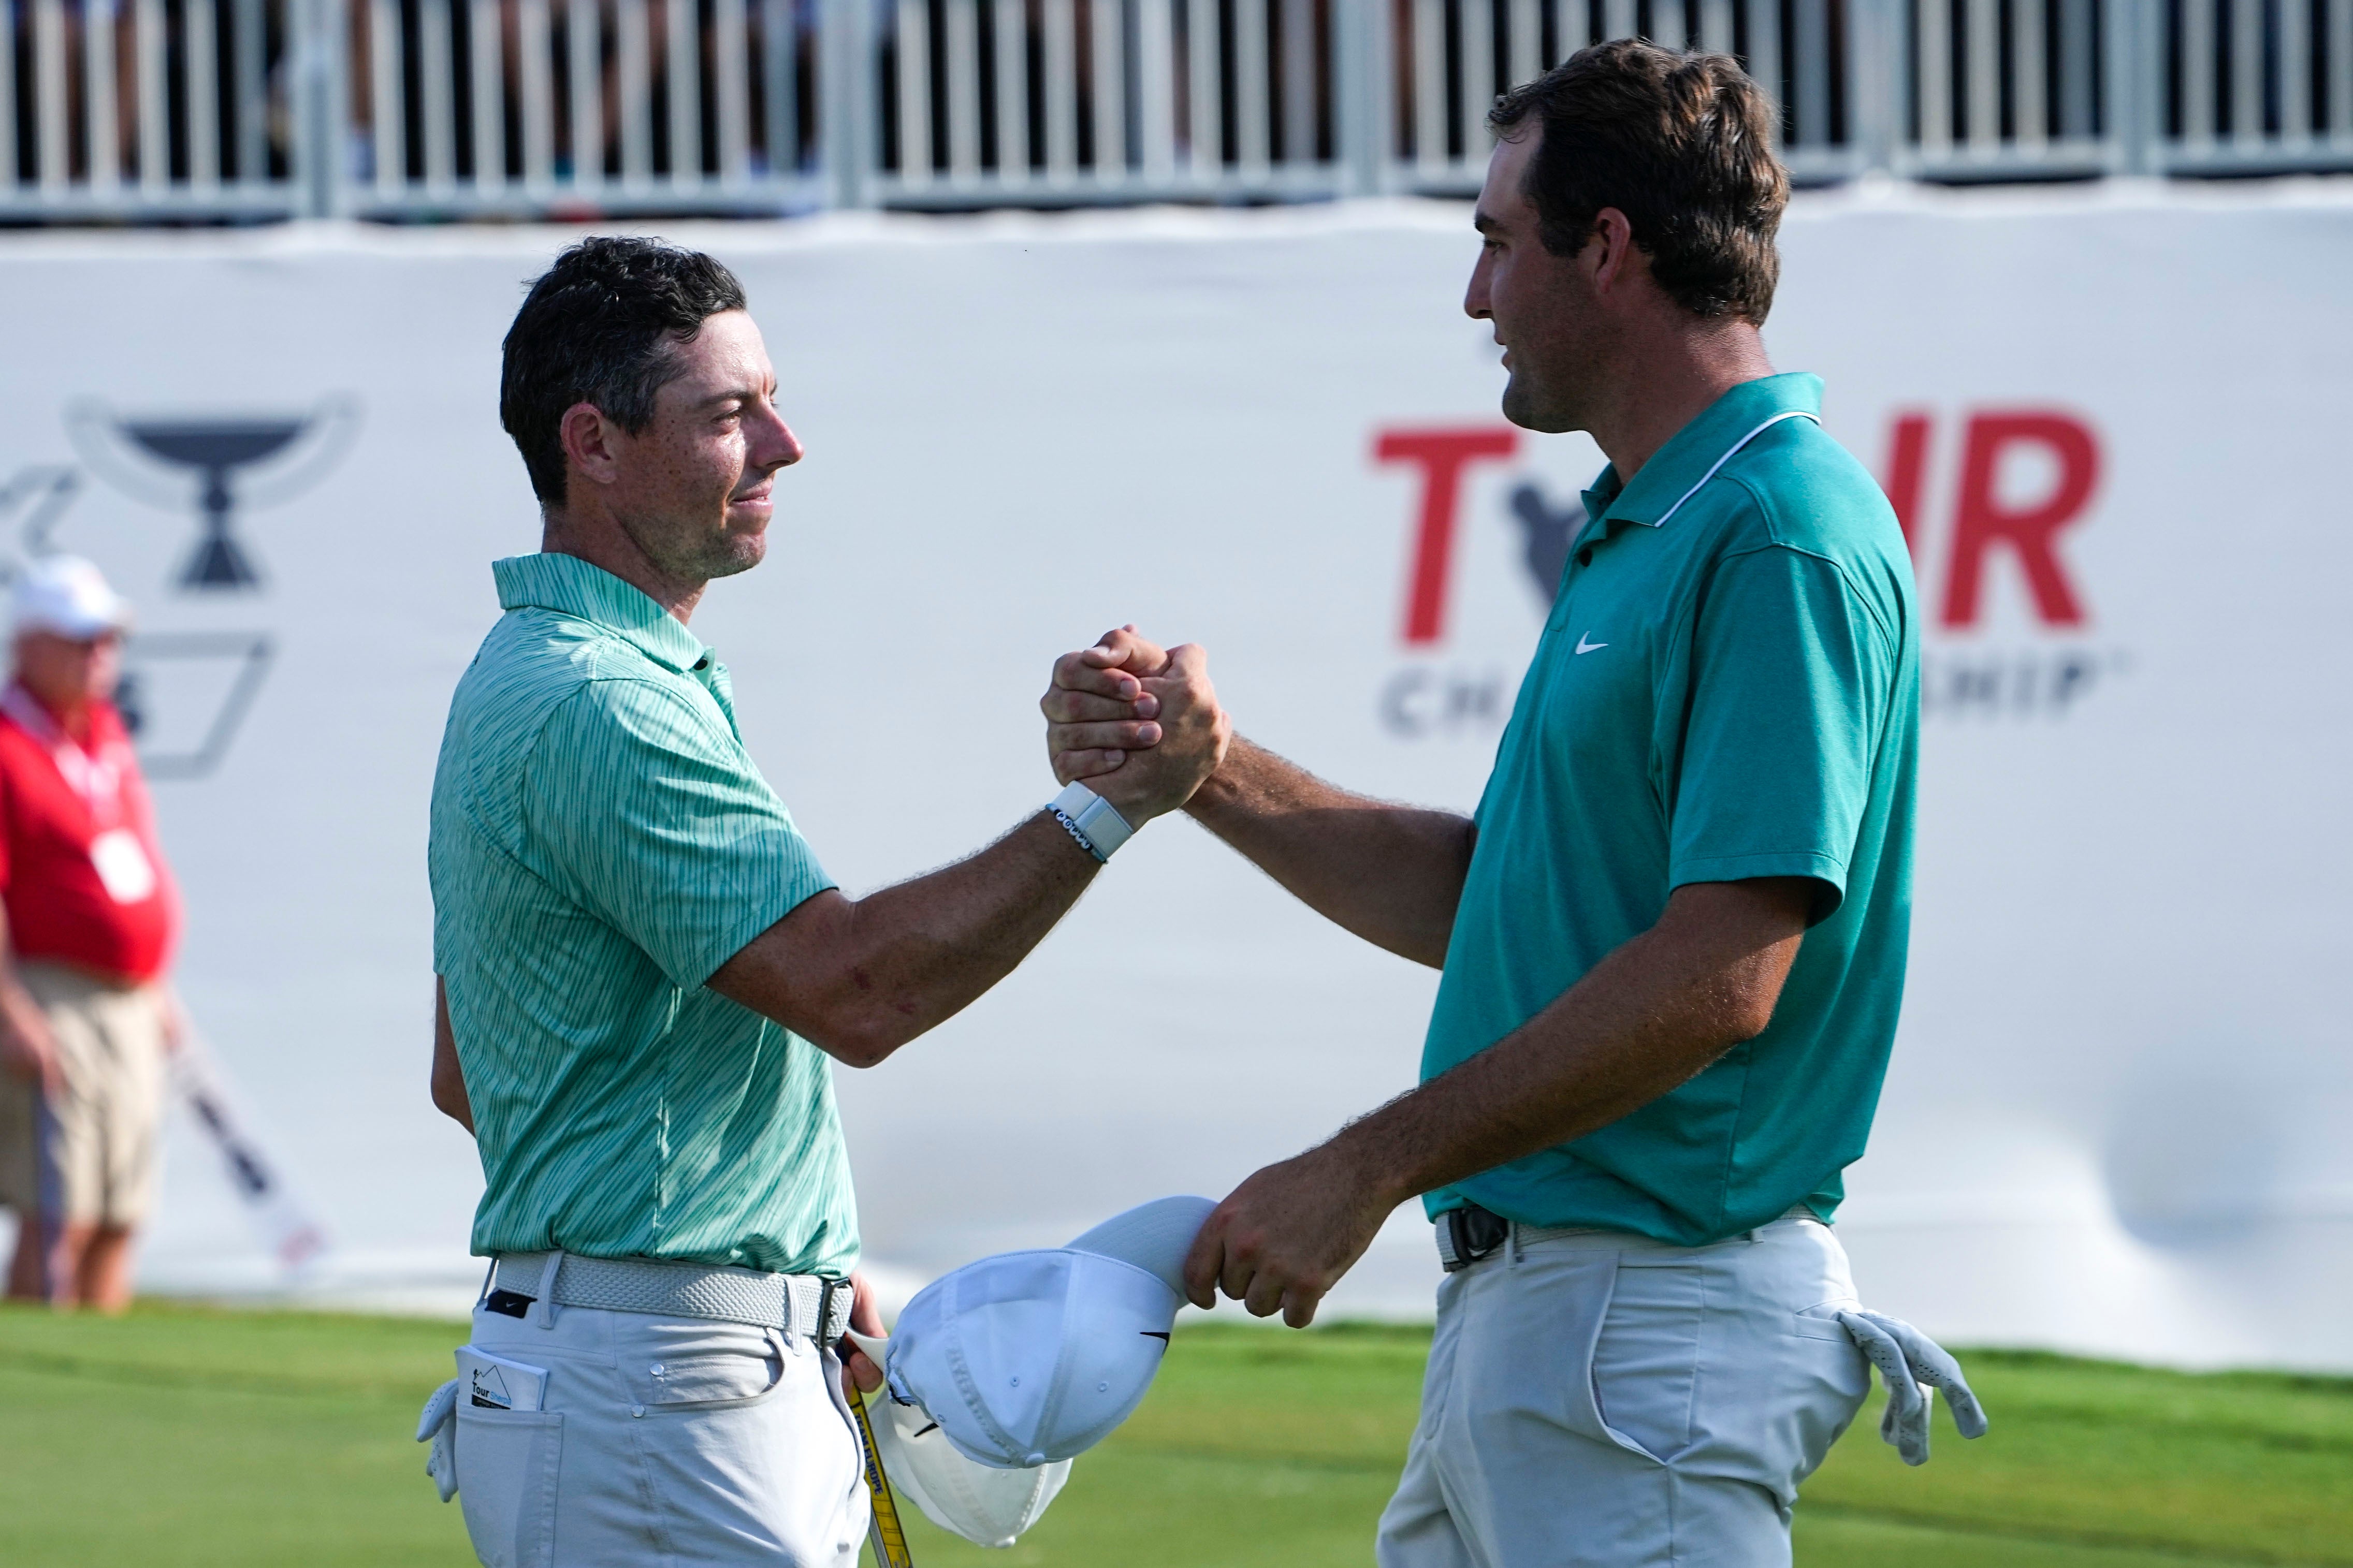 Rory McIlroy (left) shakes hands with Scottie Scheffler after winning the Tour Championship and FedEx Cup in Atlanta (Steve Helber/AP)